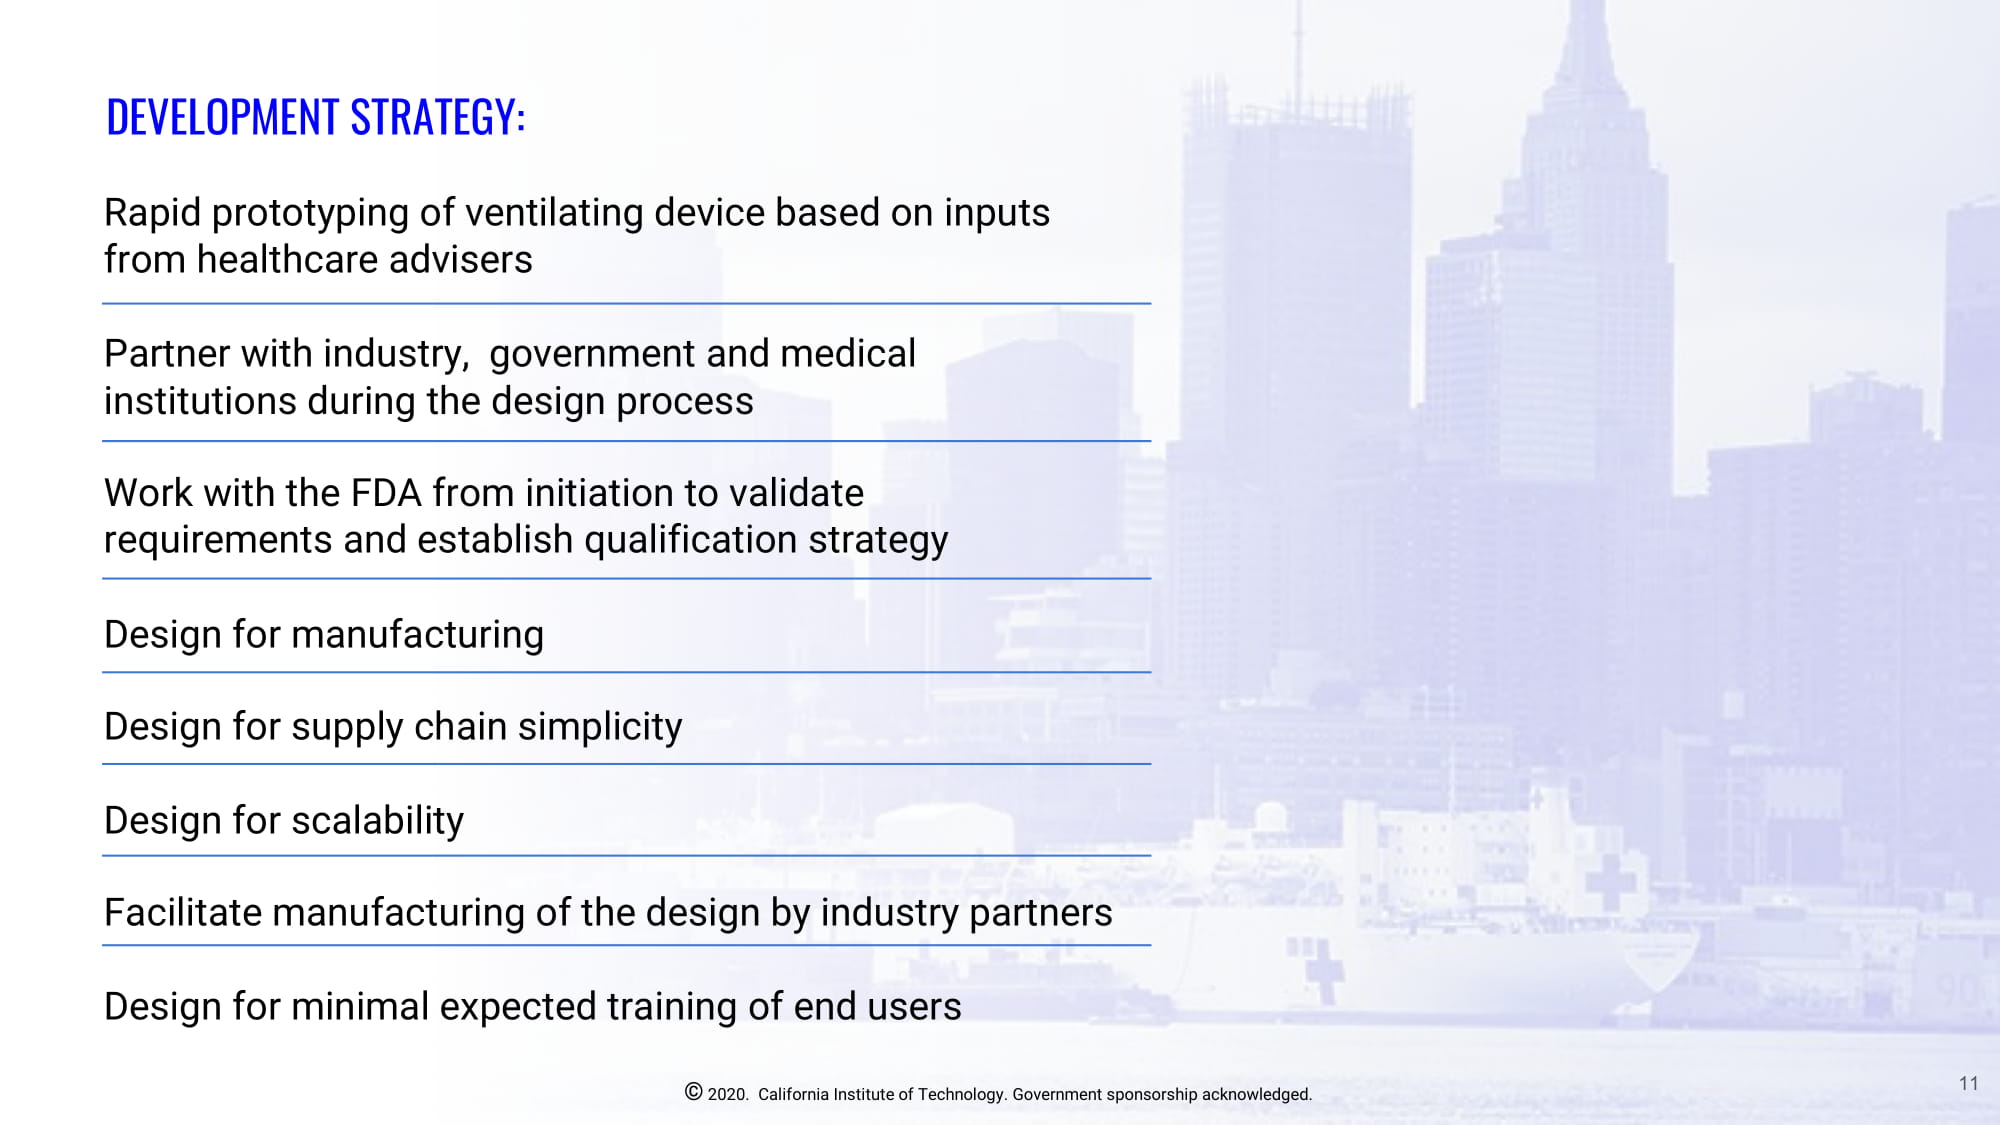 Slide 11: DESIGN PRINCIPLES OF THE VITAL DEVICE: Leverage focused device capability set to: Minimize number of mechanical and electronic components, minimizing the time to delivery of working and tested units. - Avoid using components that are critical to the production of full-featured ventilators by industry. - Exclude patient exhalation gases from the circuit to avoid a device sterilization cycle prior to the next patient.